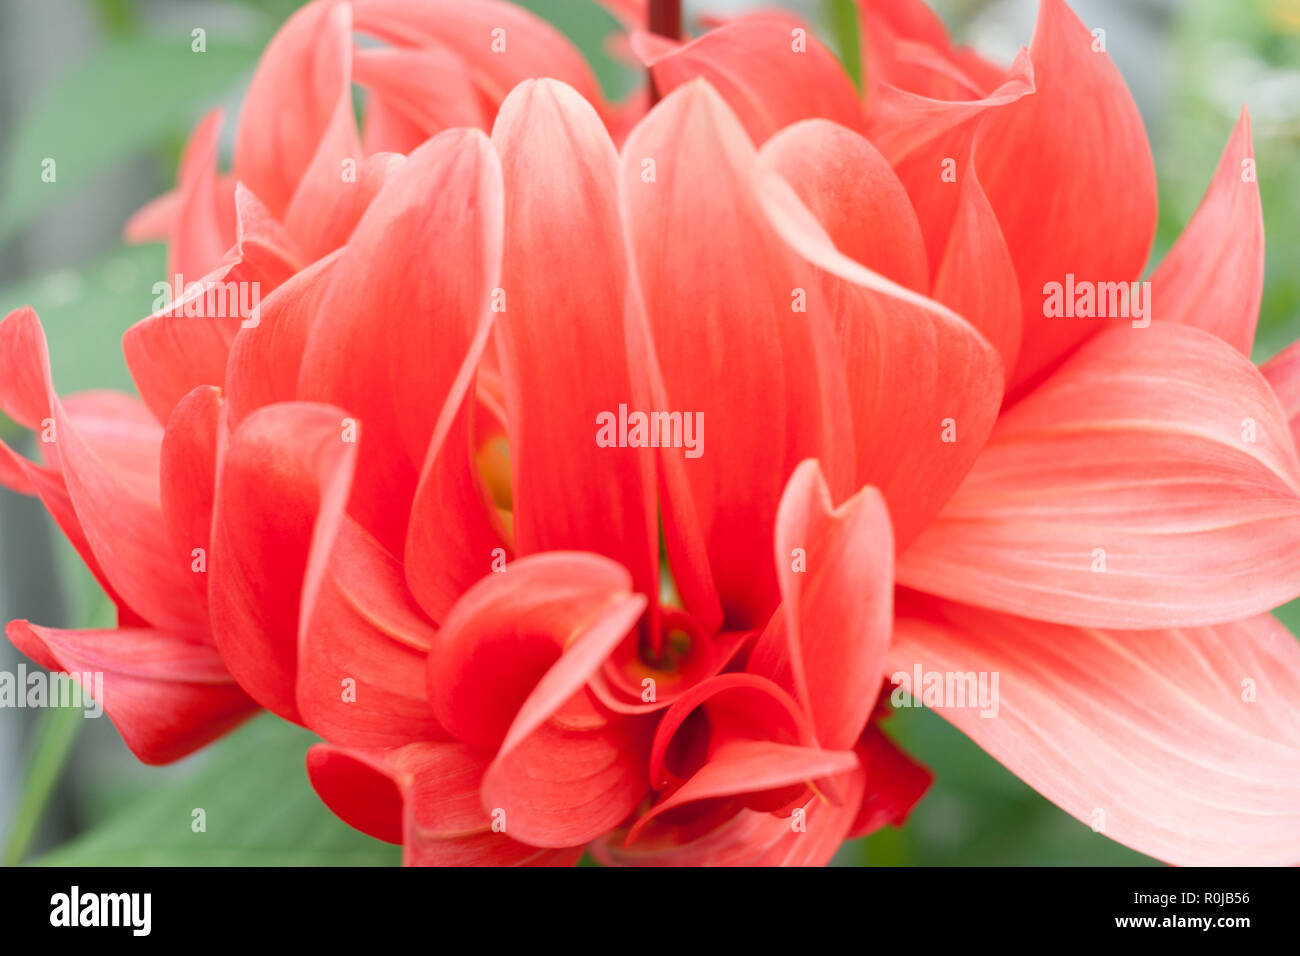 Beautiful floral background of delicate red-pink petals of a Dahlia. Stock Photo